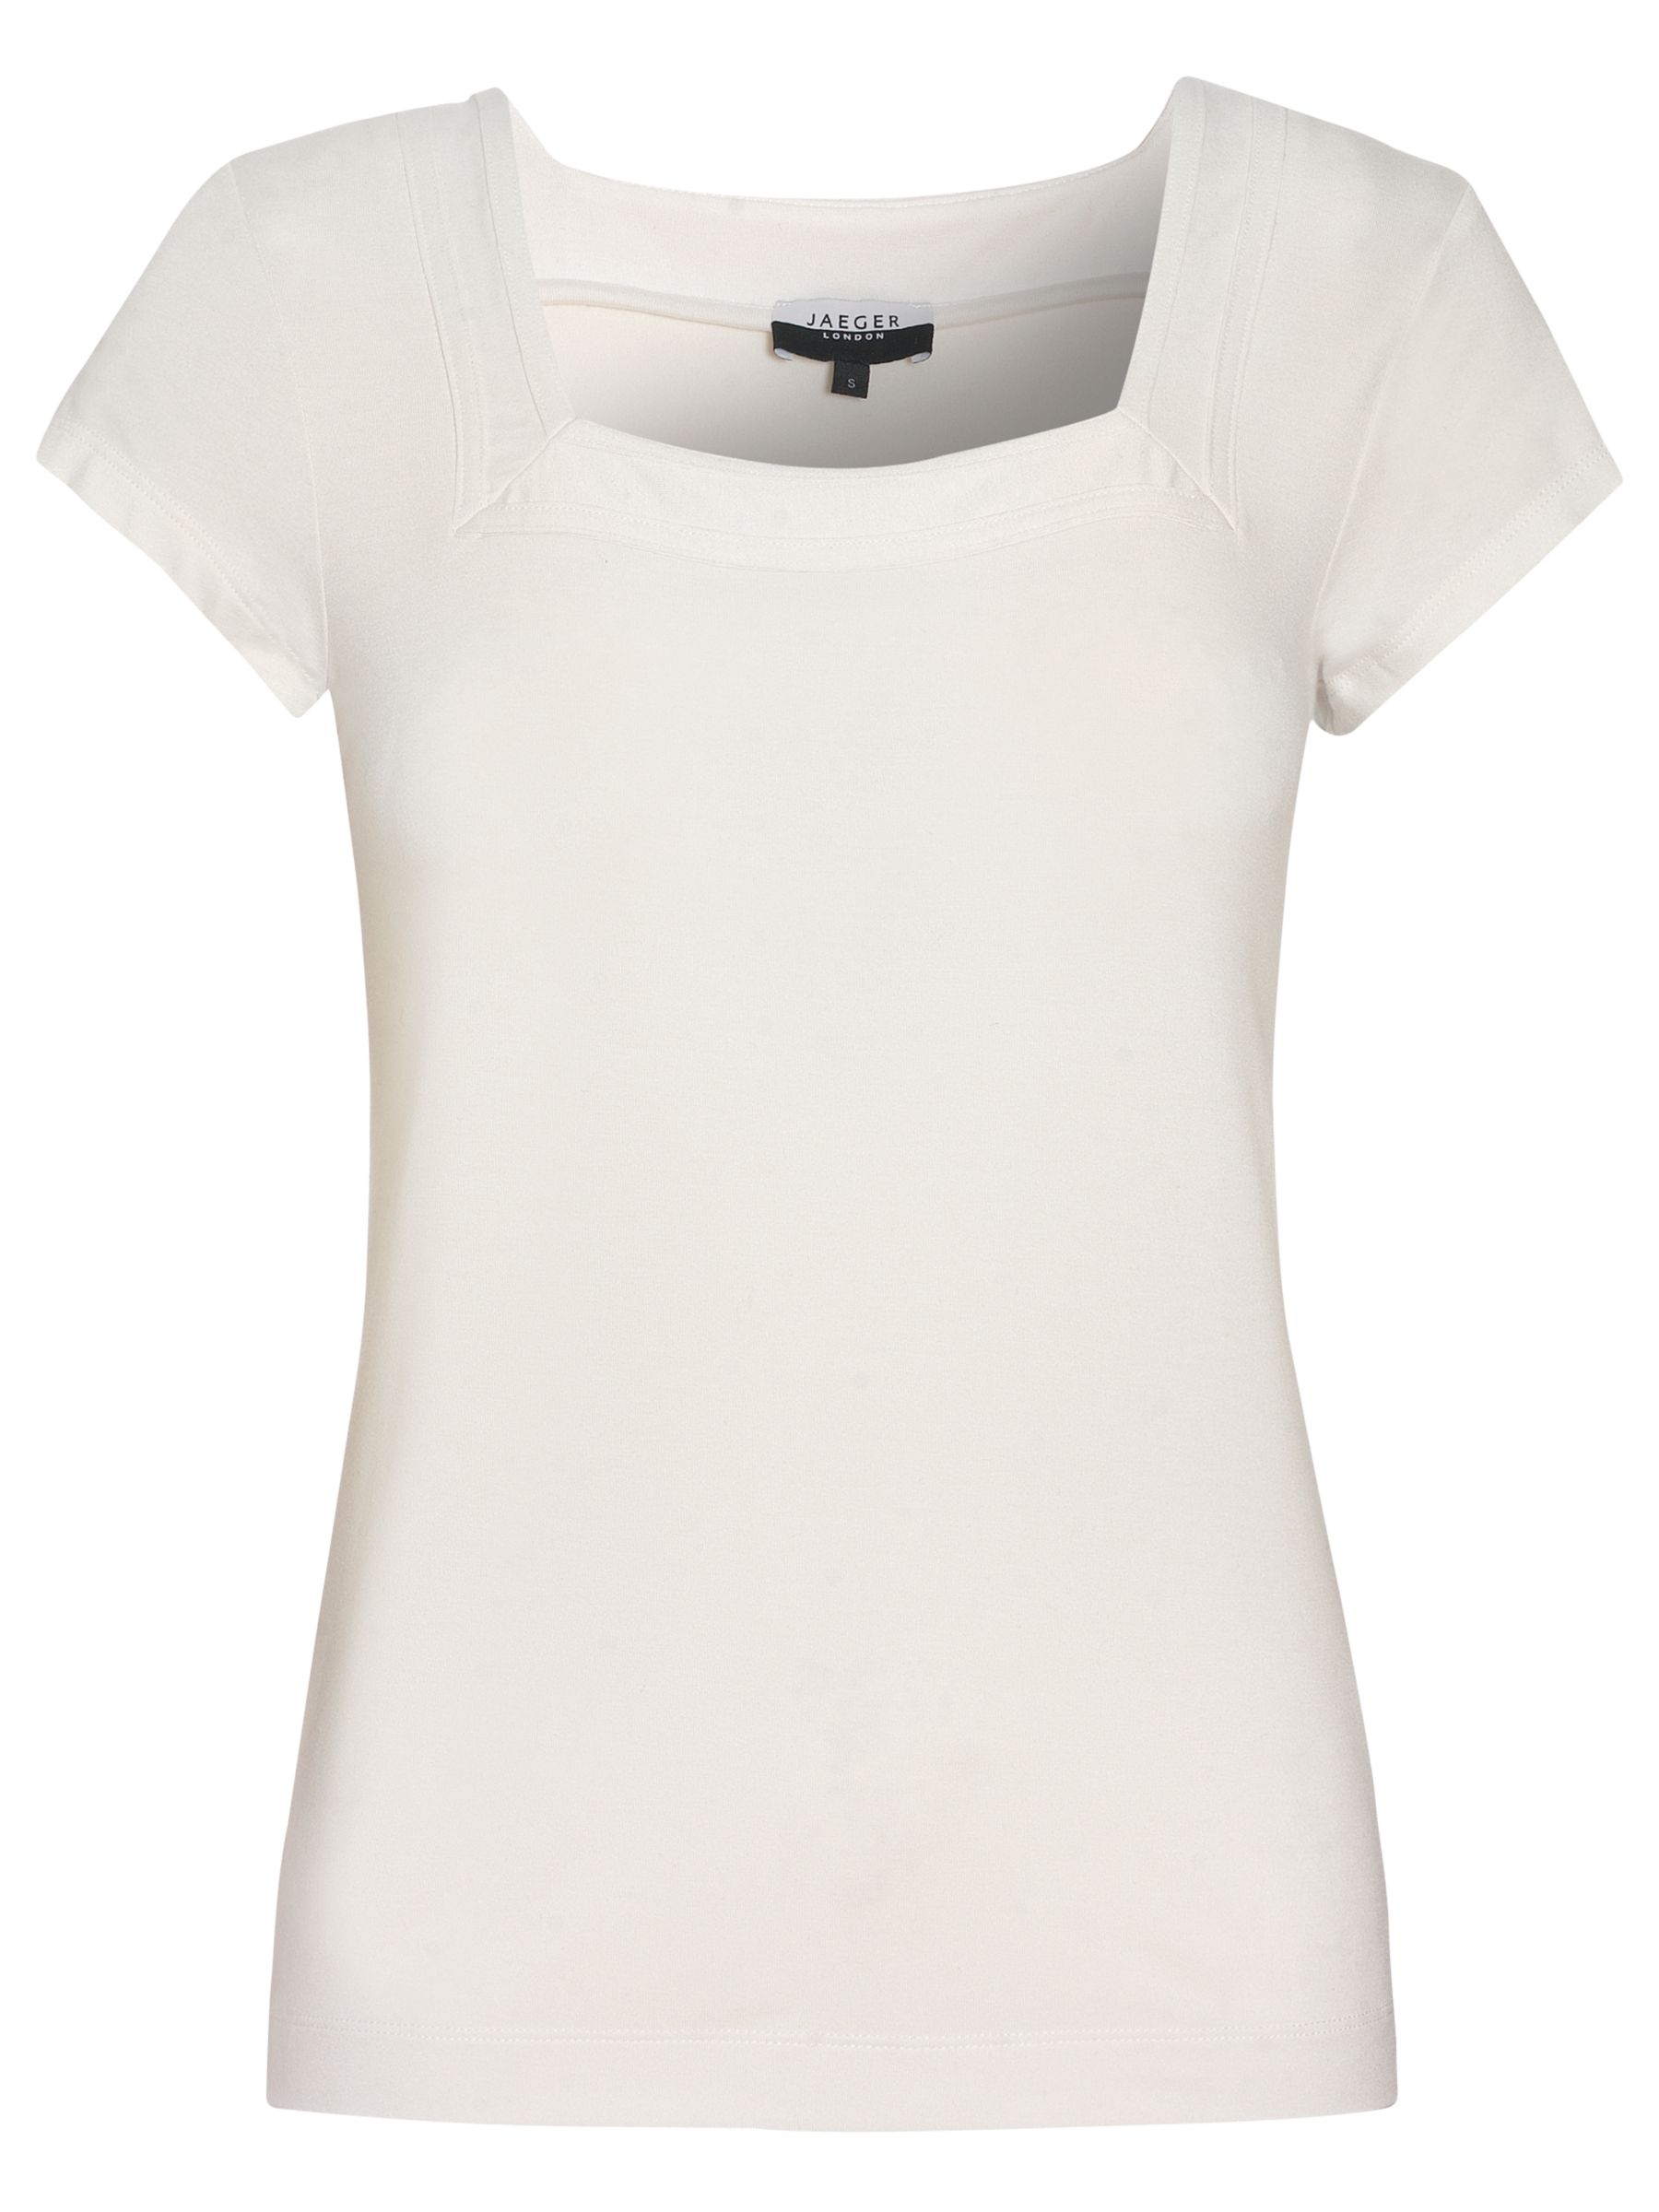 Jaeger Self Piping Jersey T-Shirt, Ivory